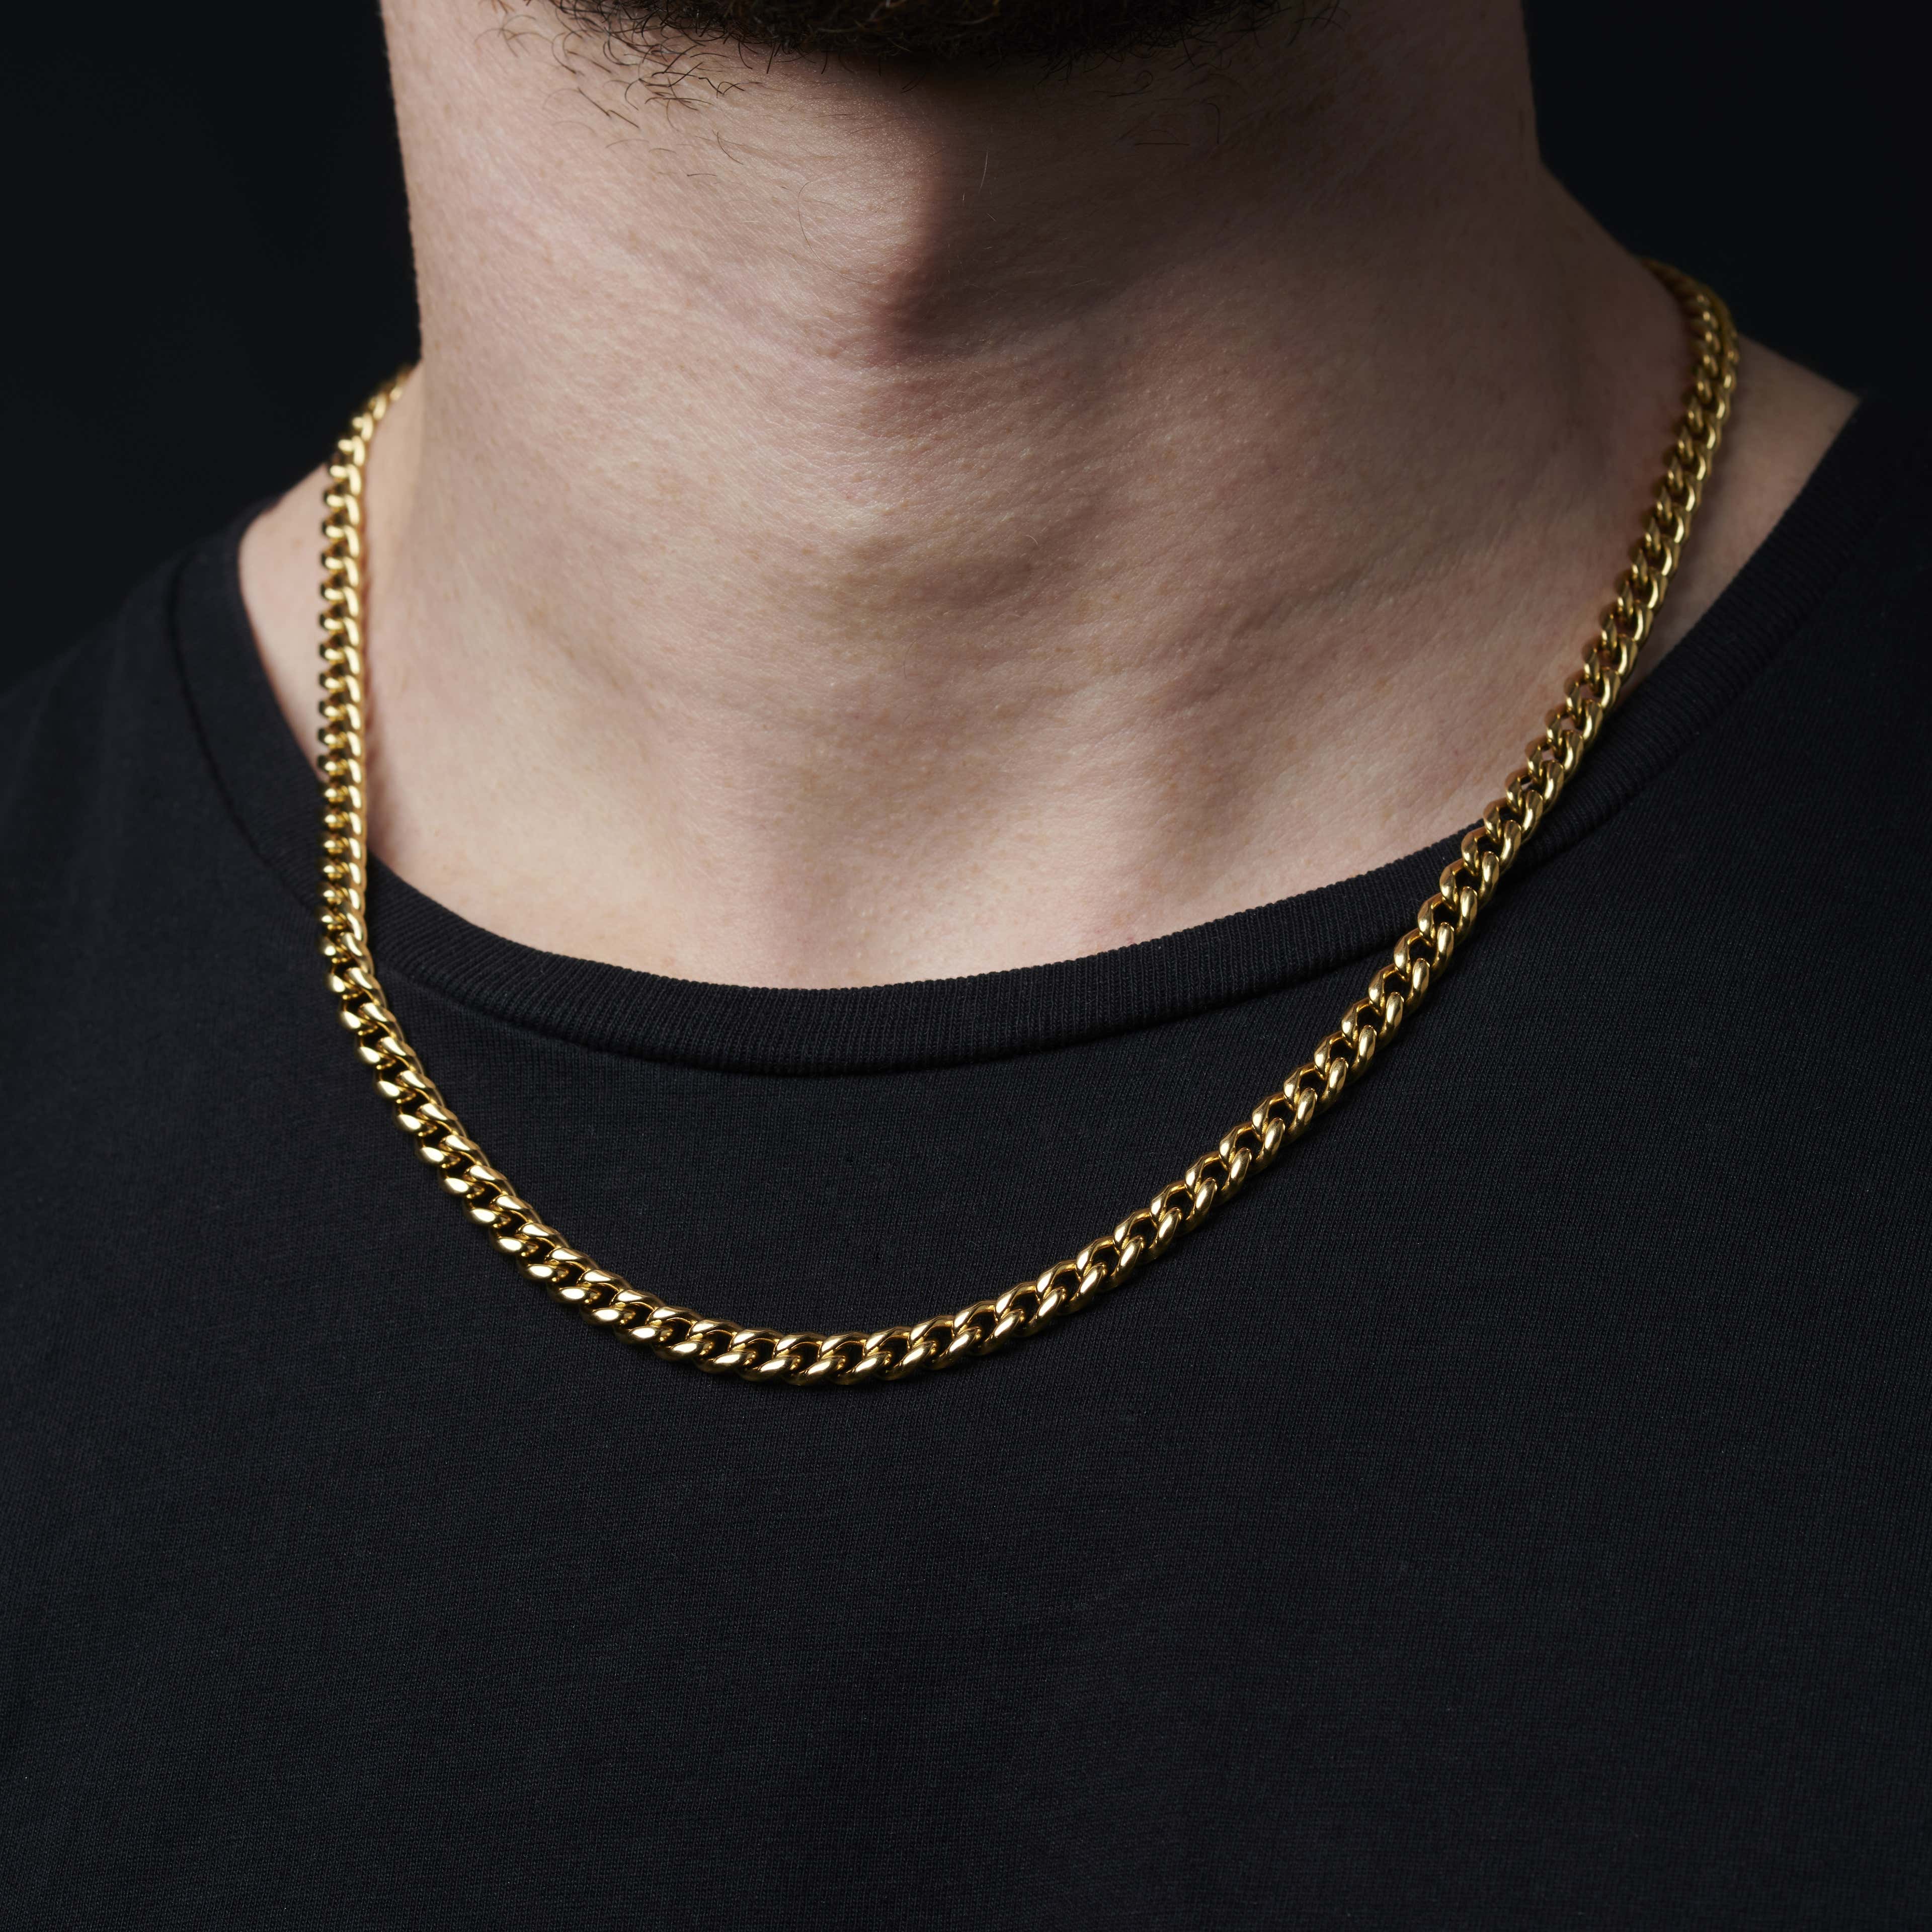 6mm Gold-Tone Chain Necklace - 6 - hover gallery